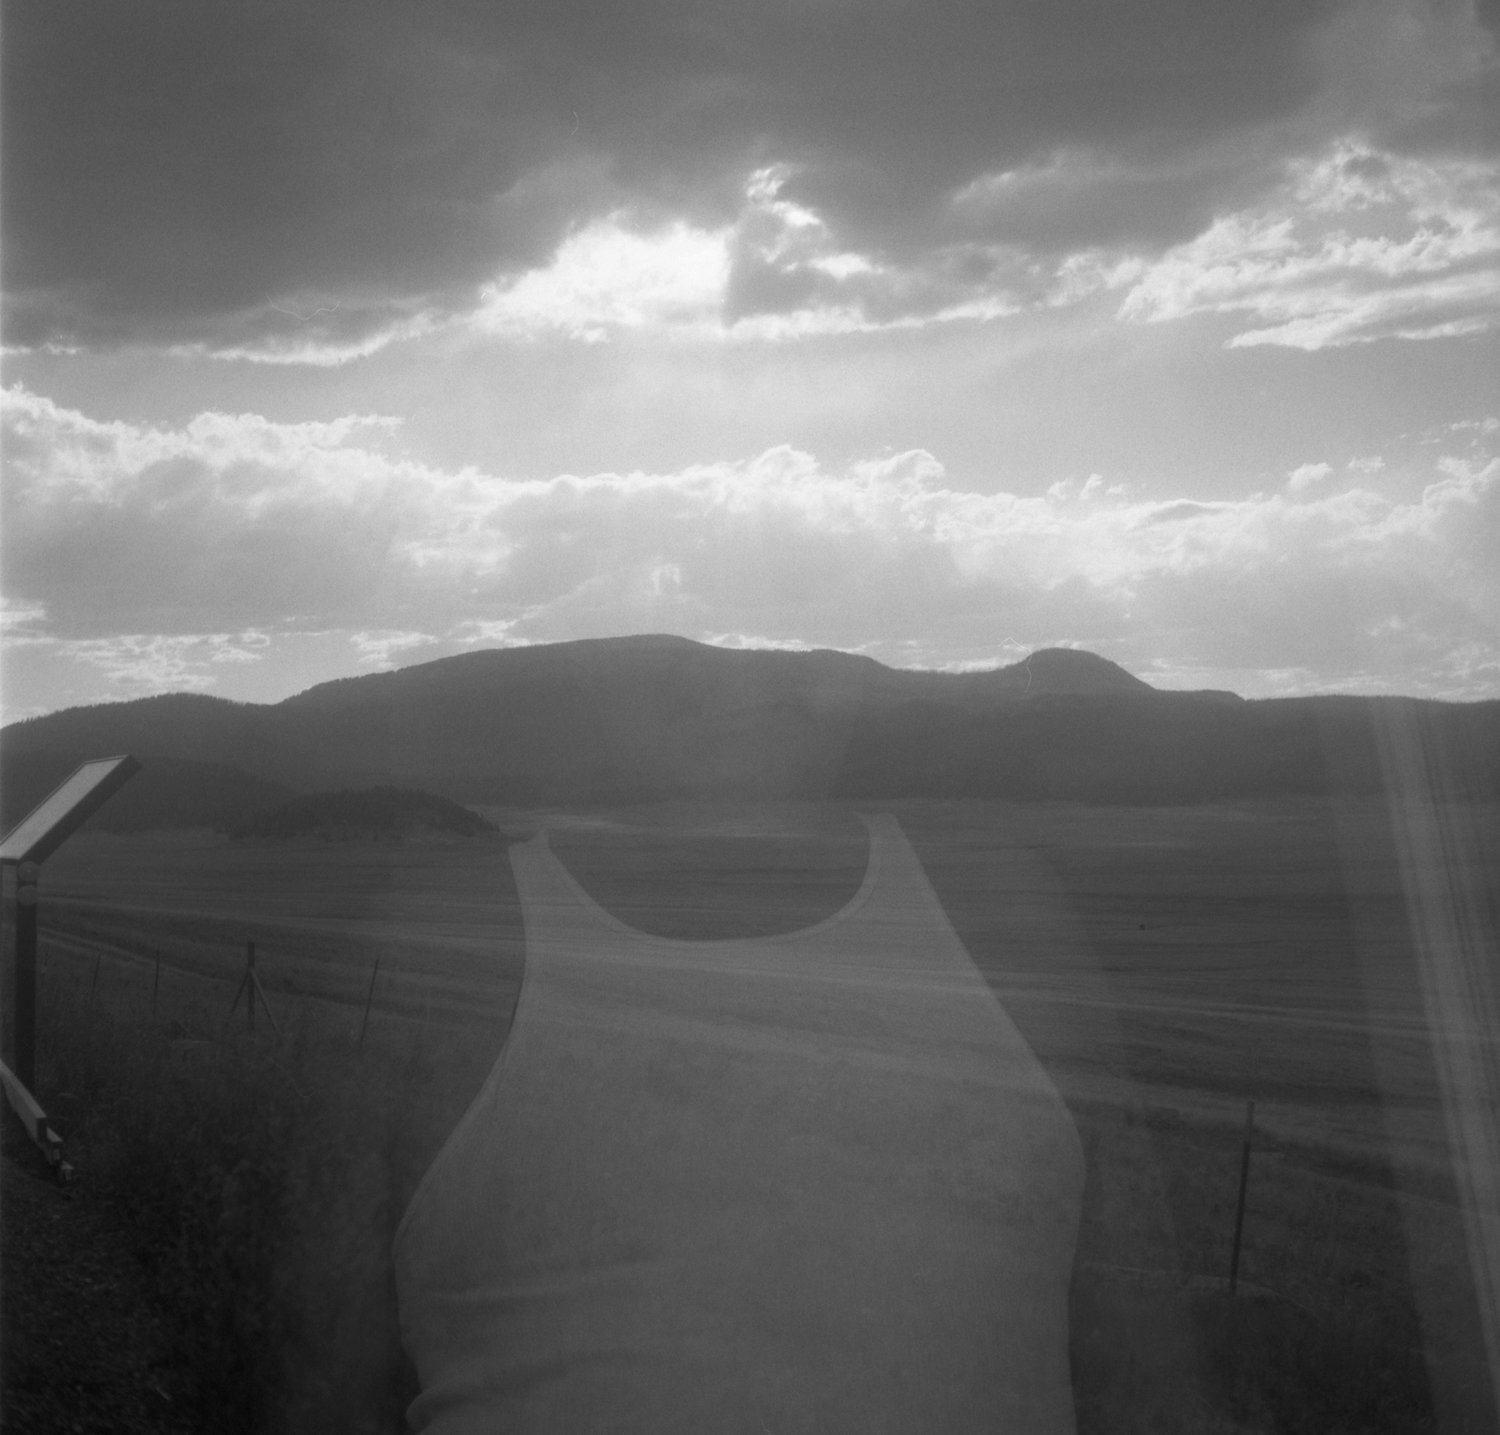 “I love you, mucho mucho” by Maryssa Rose Chavez, 2020, black and white film image. “My dad at the front door double exposed over the Valles Caldera, northern New Mexico.”